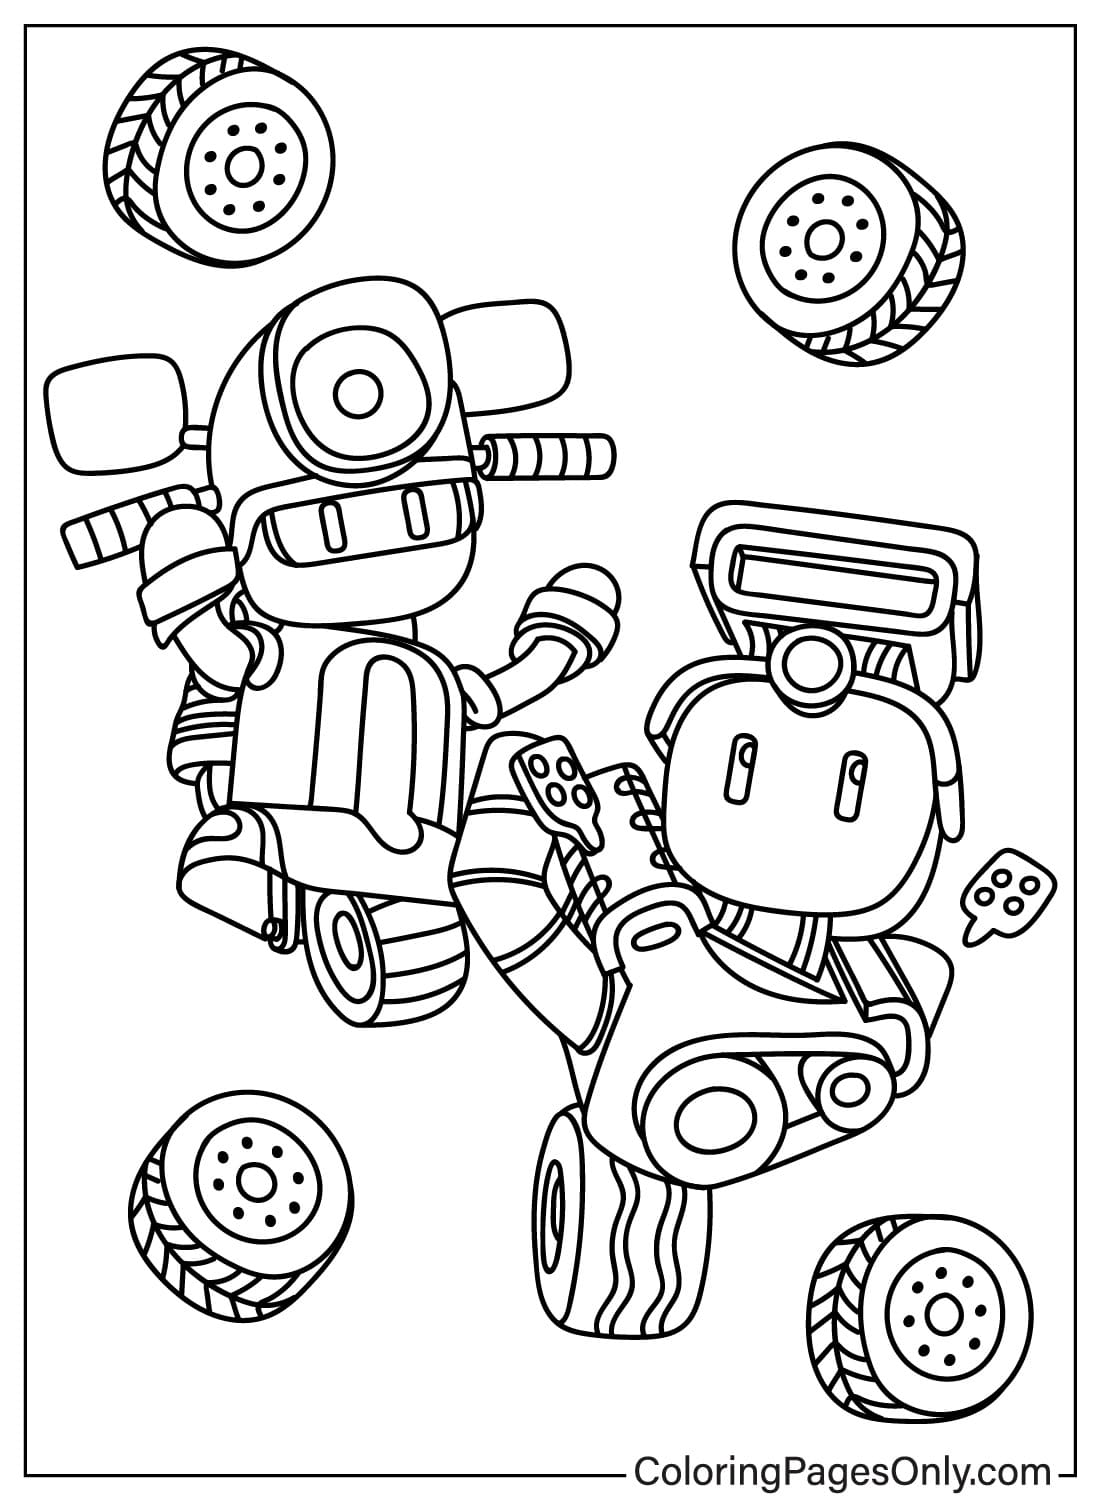 Stumble Guys Drawing Coloring Page from Stumble Guys